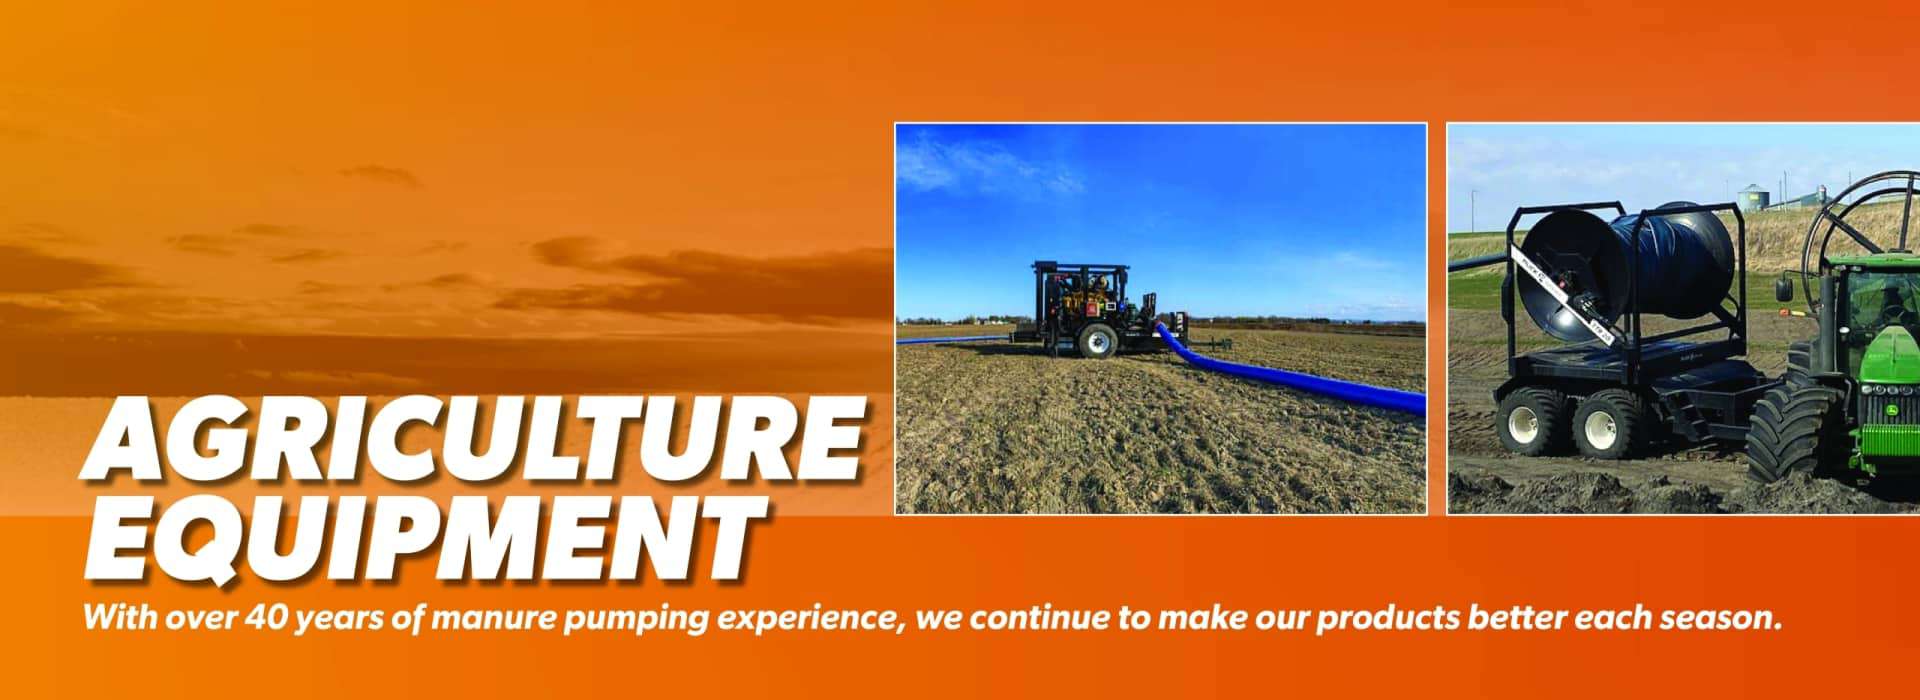 agriculture equipment banner